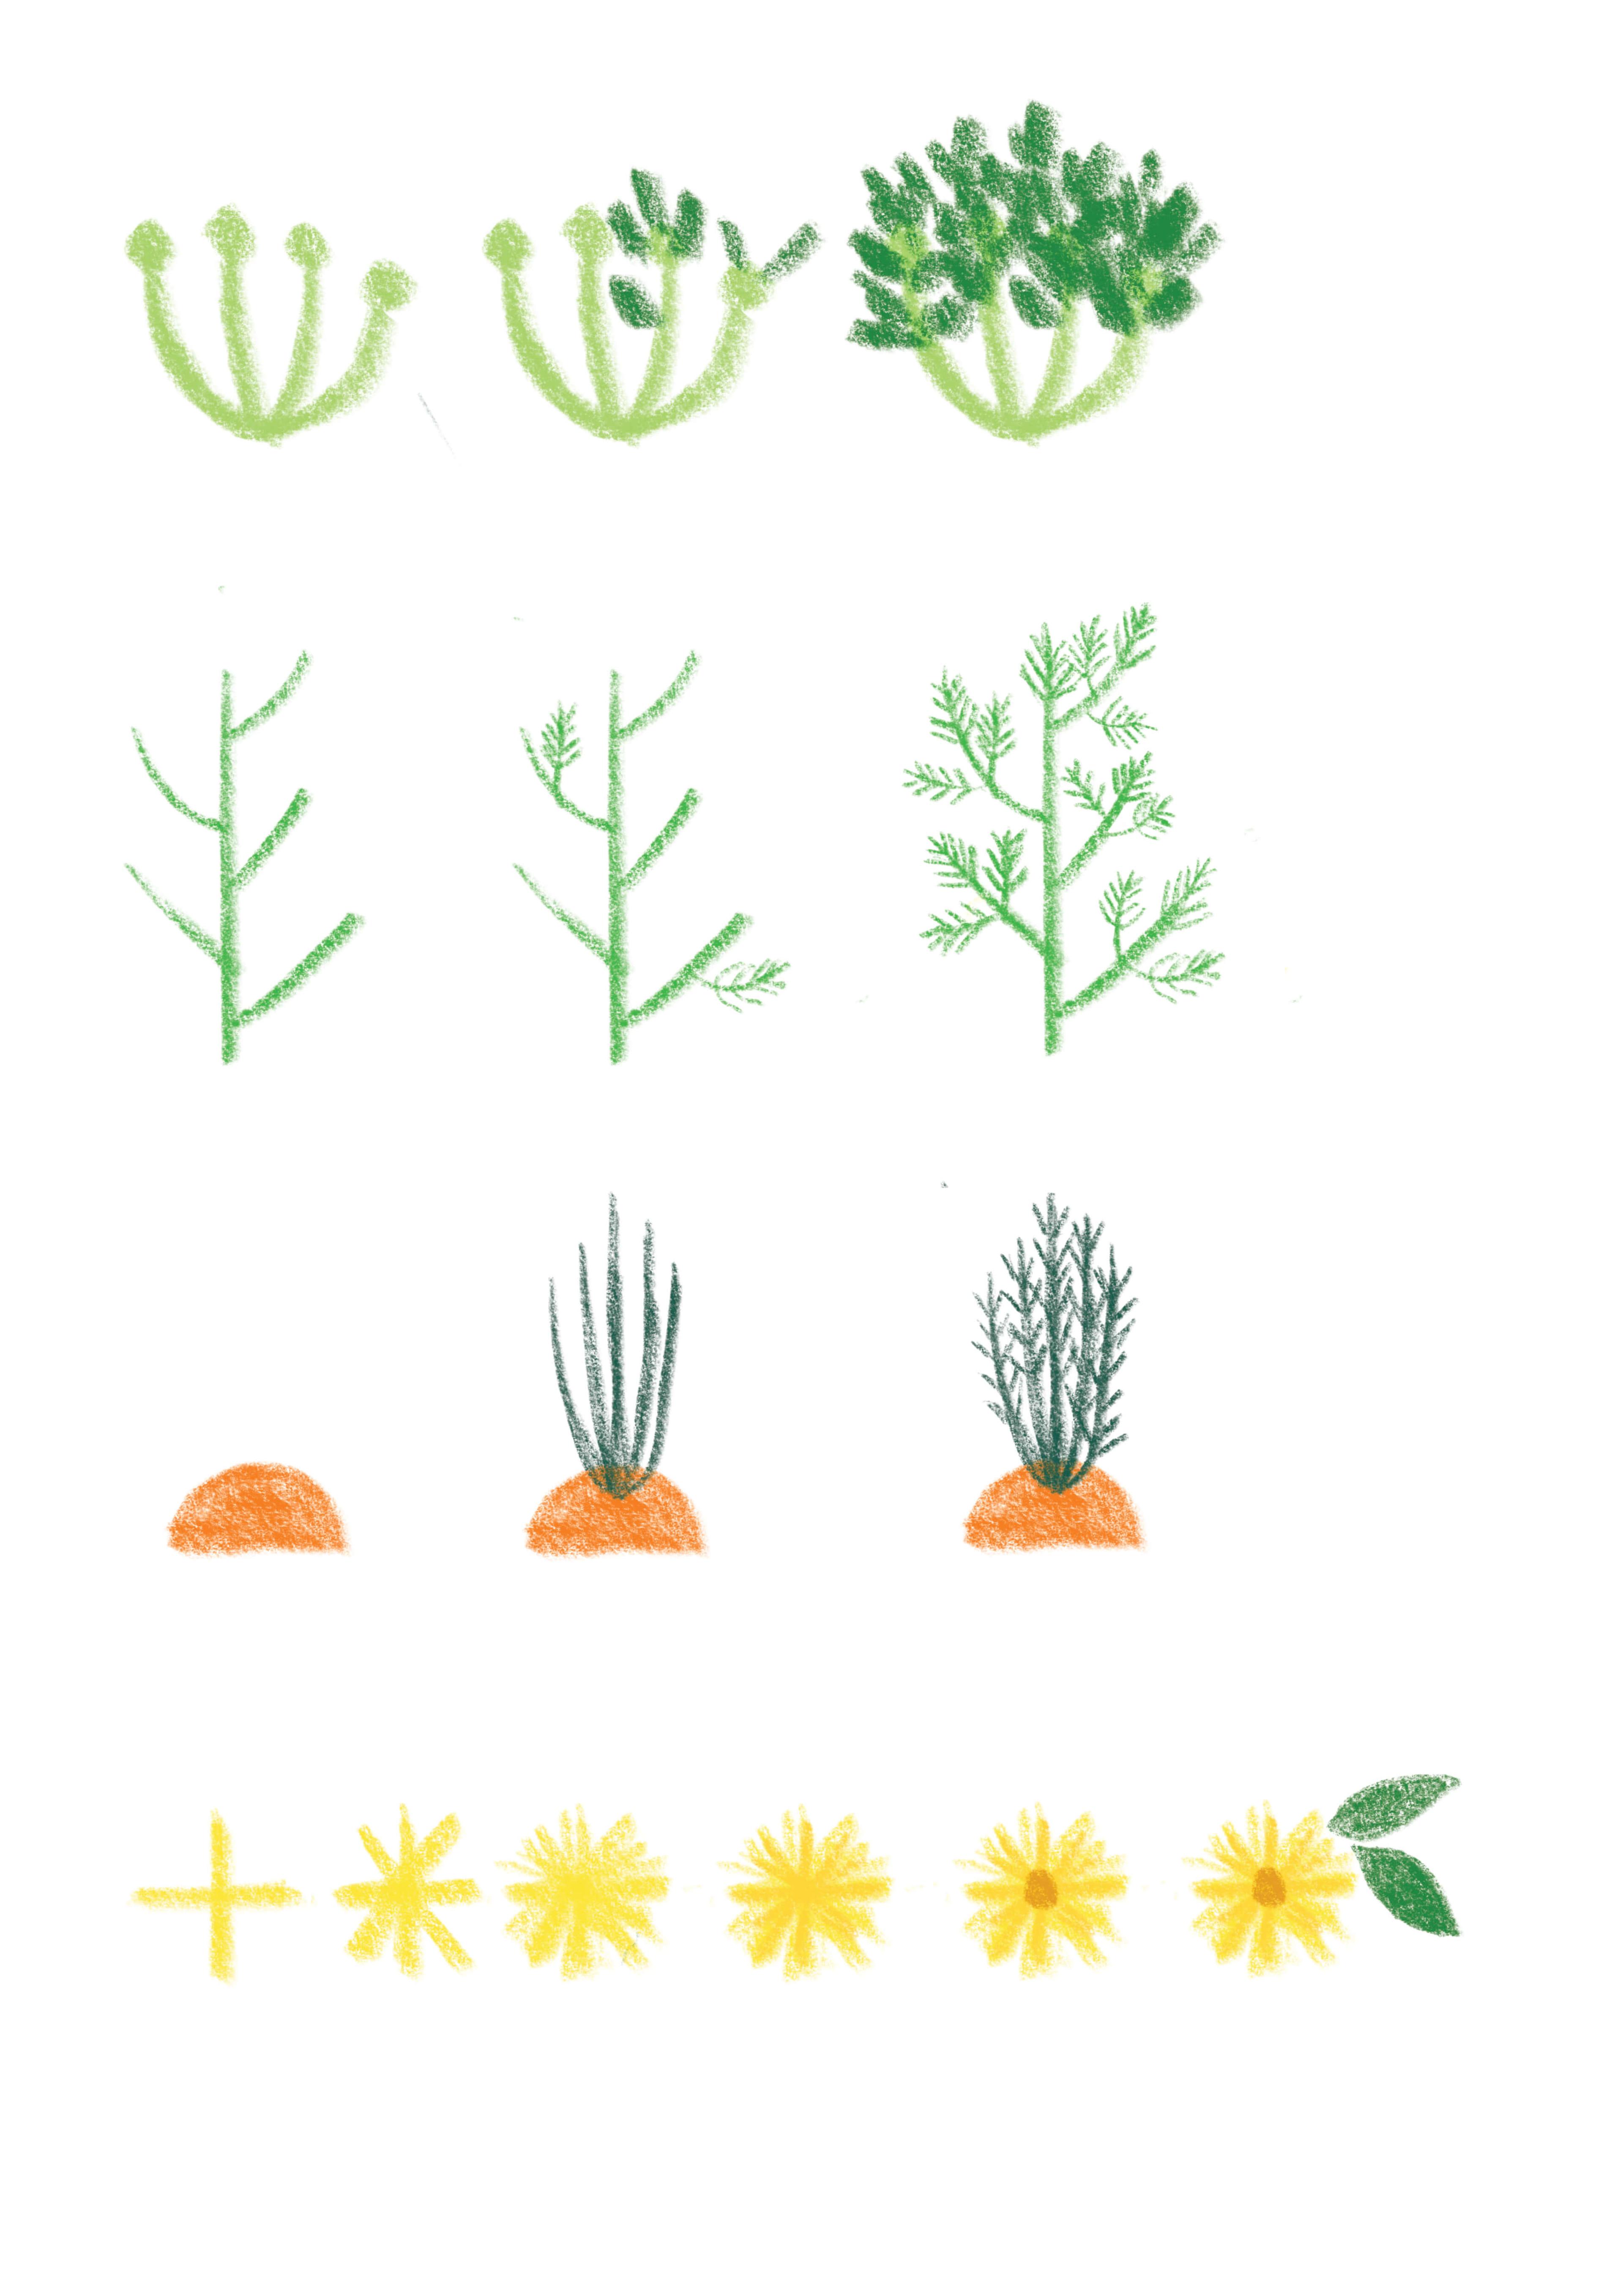 Illustration of plants growing step-by-step